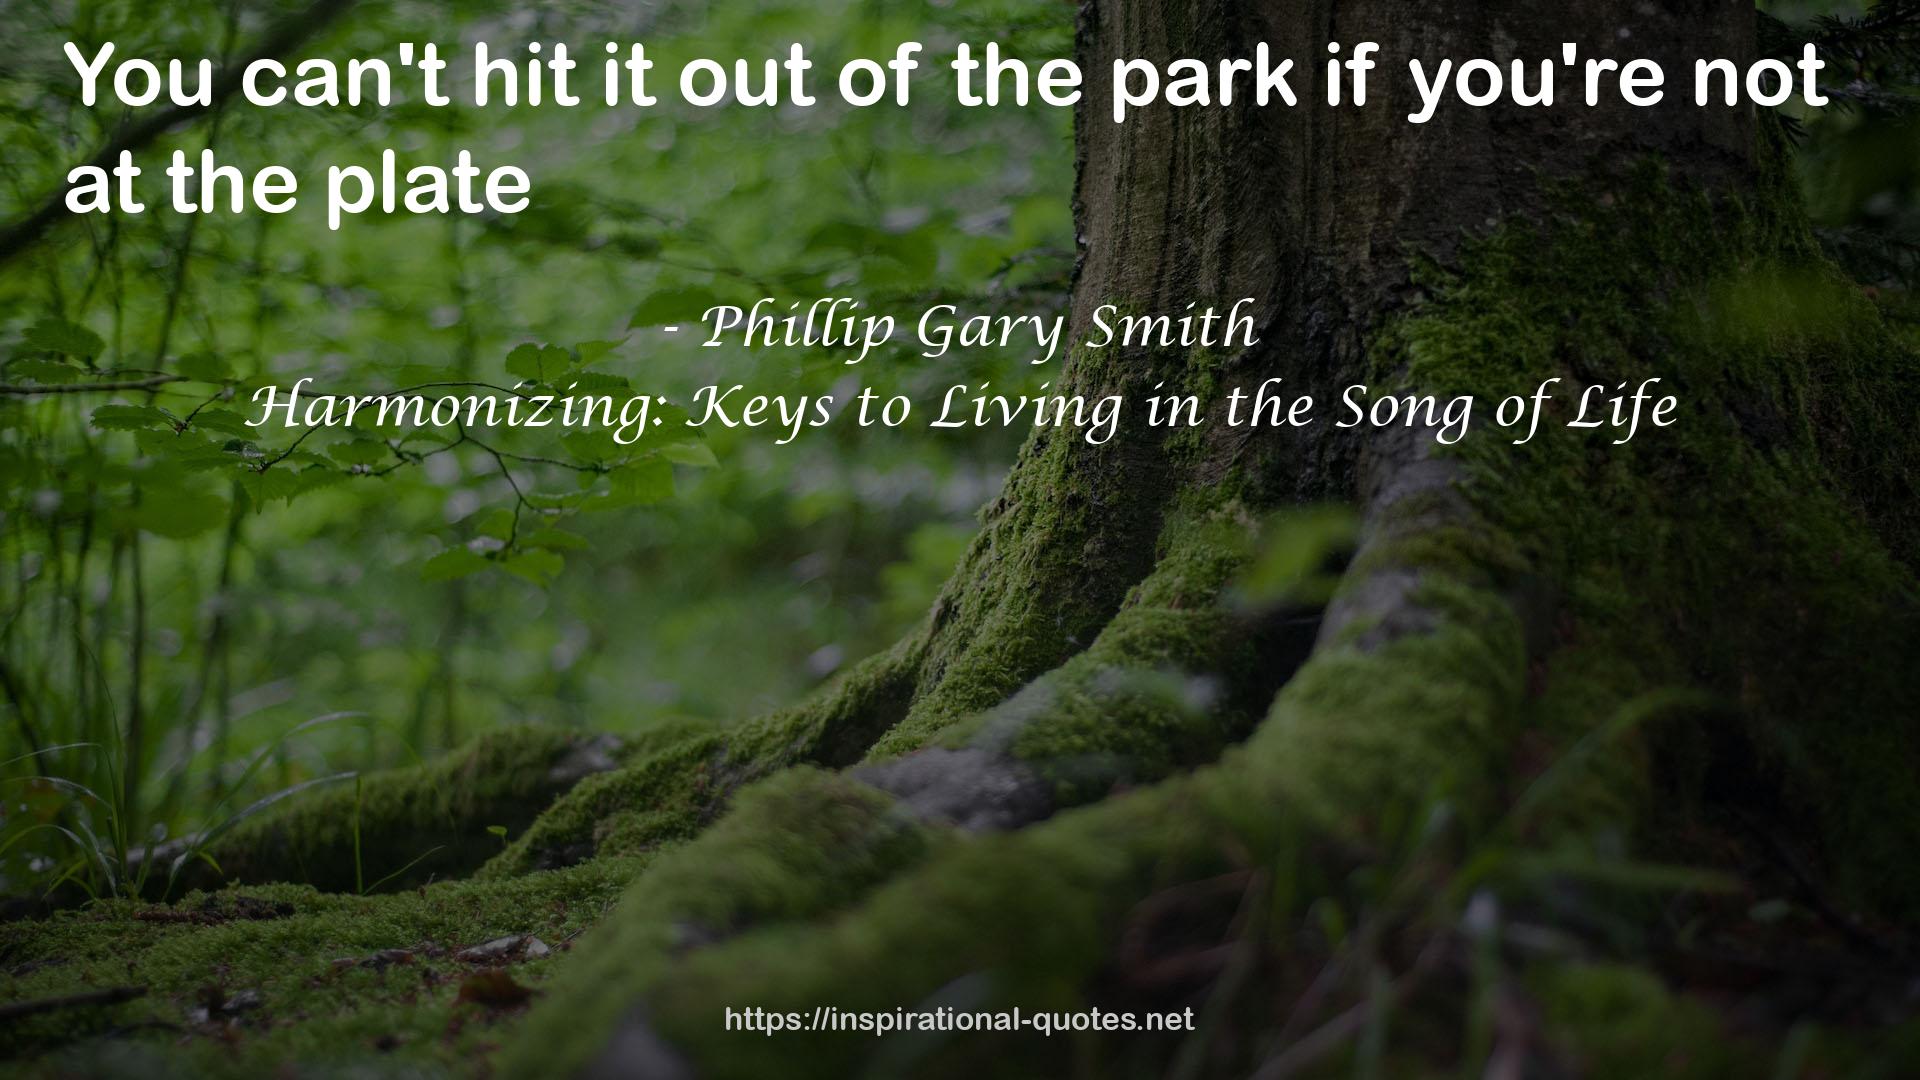 Harmonizing: Keys to Living in the Song of Life QUOTES